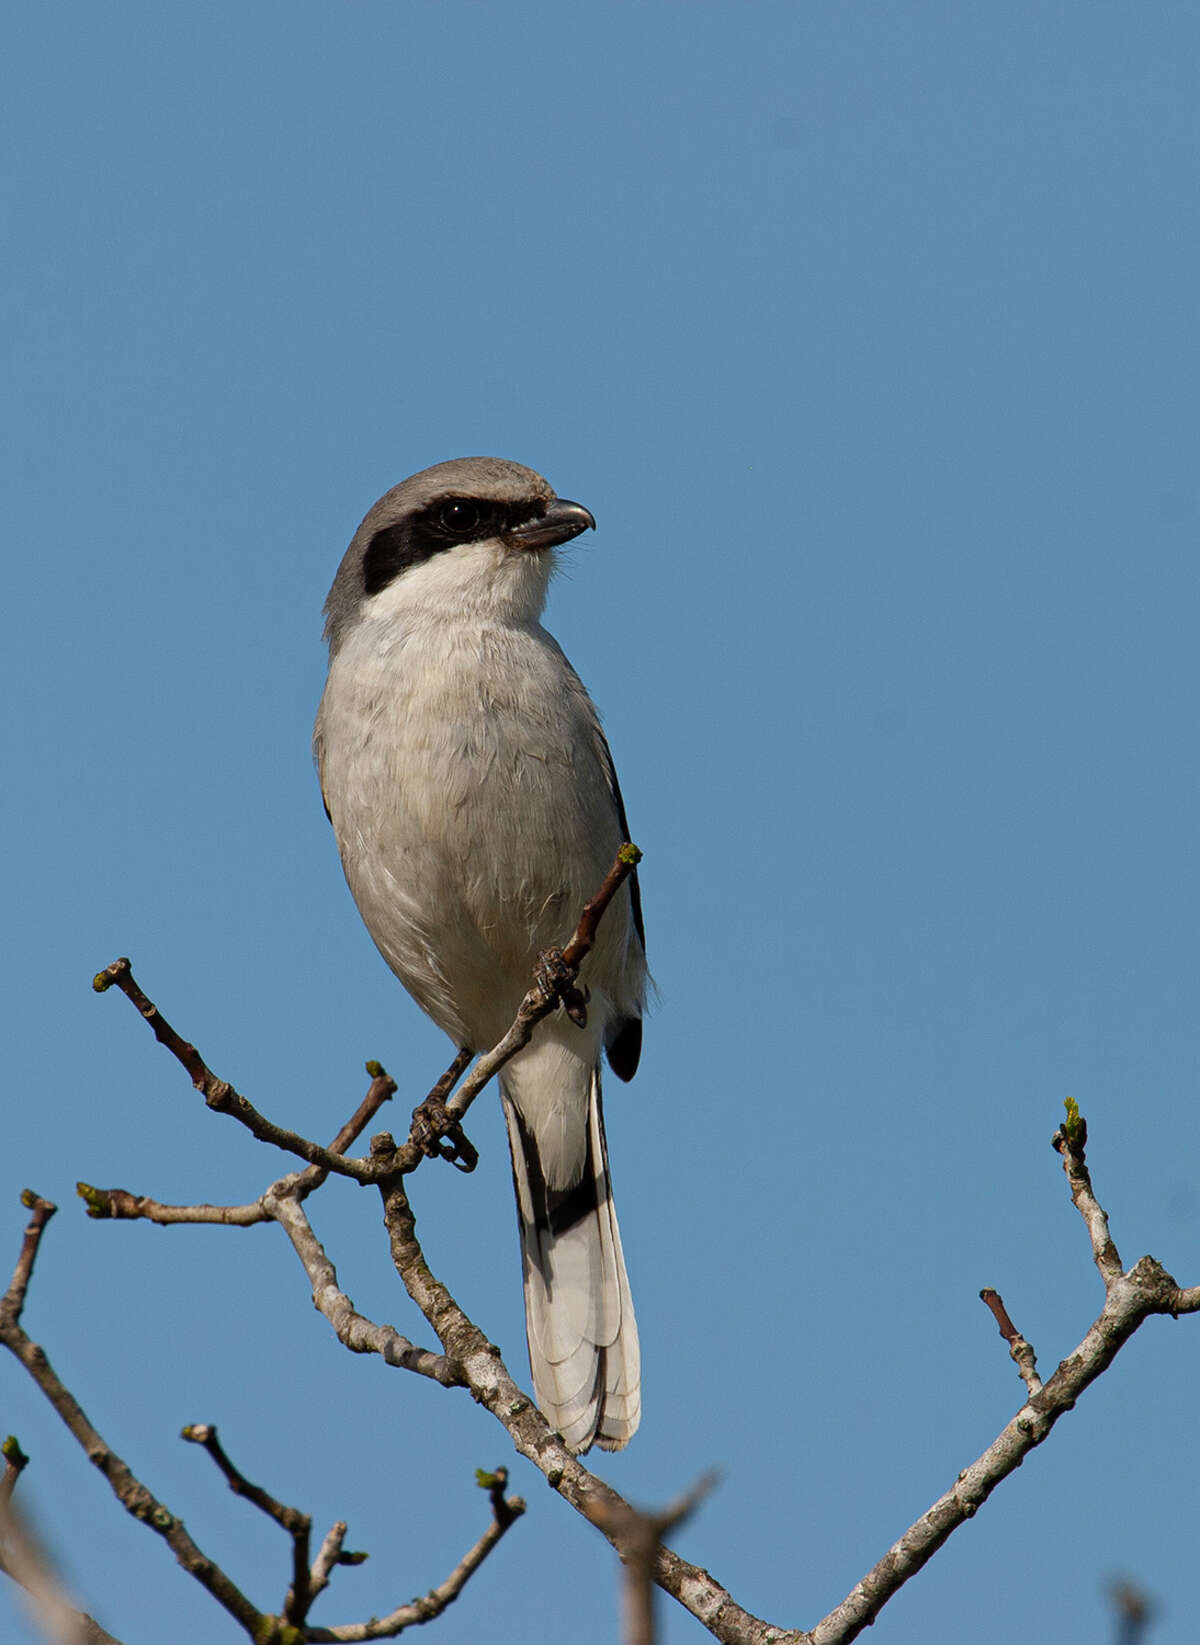 Look for a loggerhead shrike during a your visit to Coastal Prairie Conservancy property. Photo Credit: Kathy Adams Clark. Restricted use.